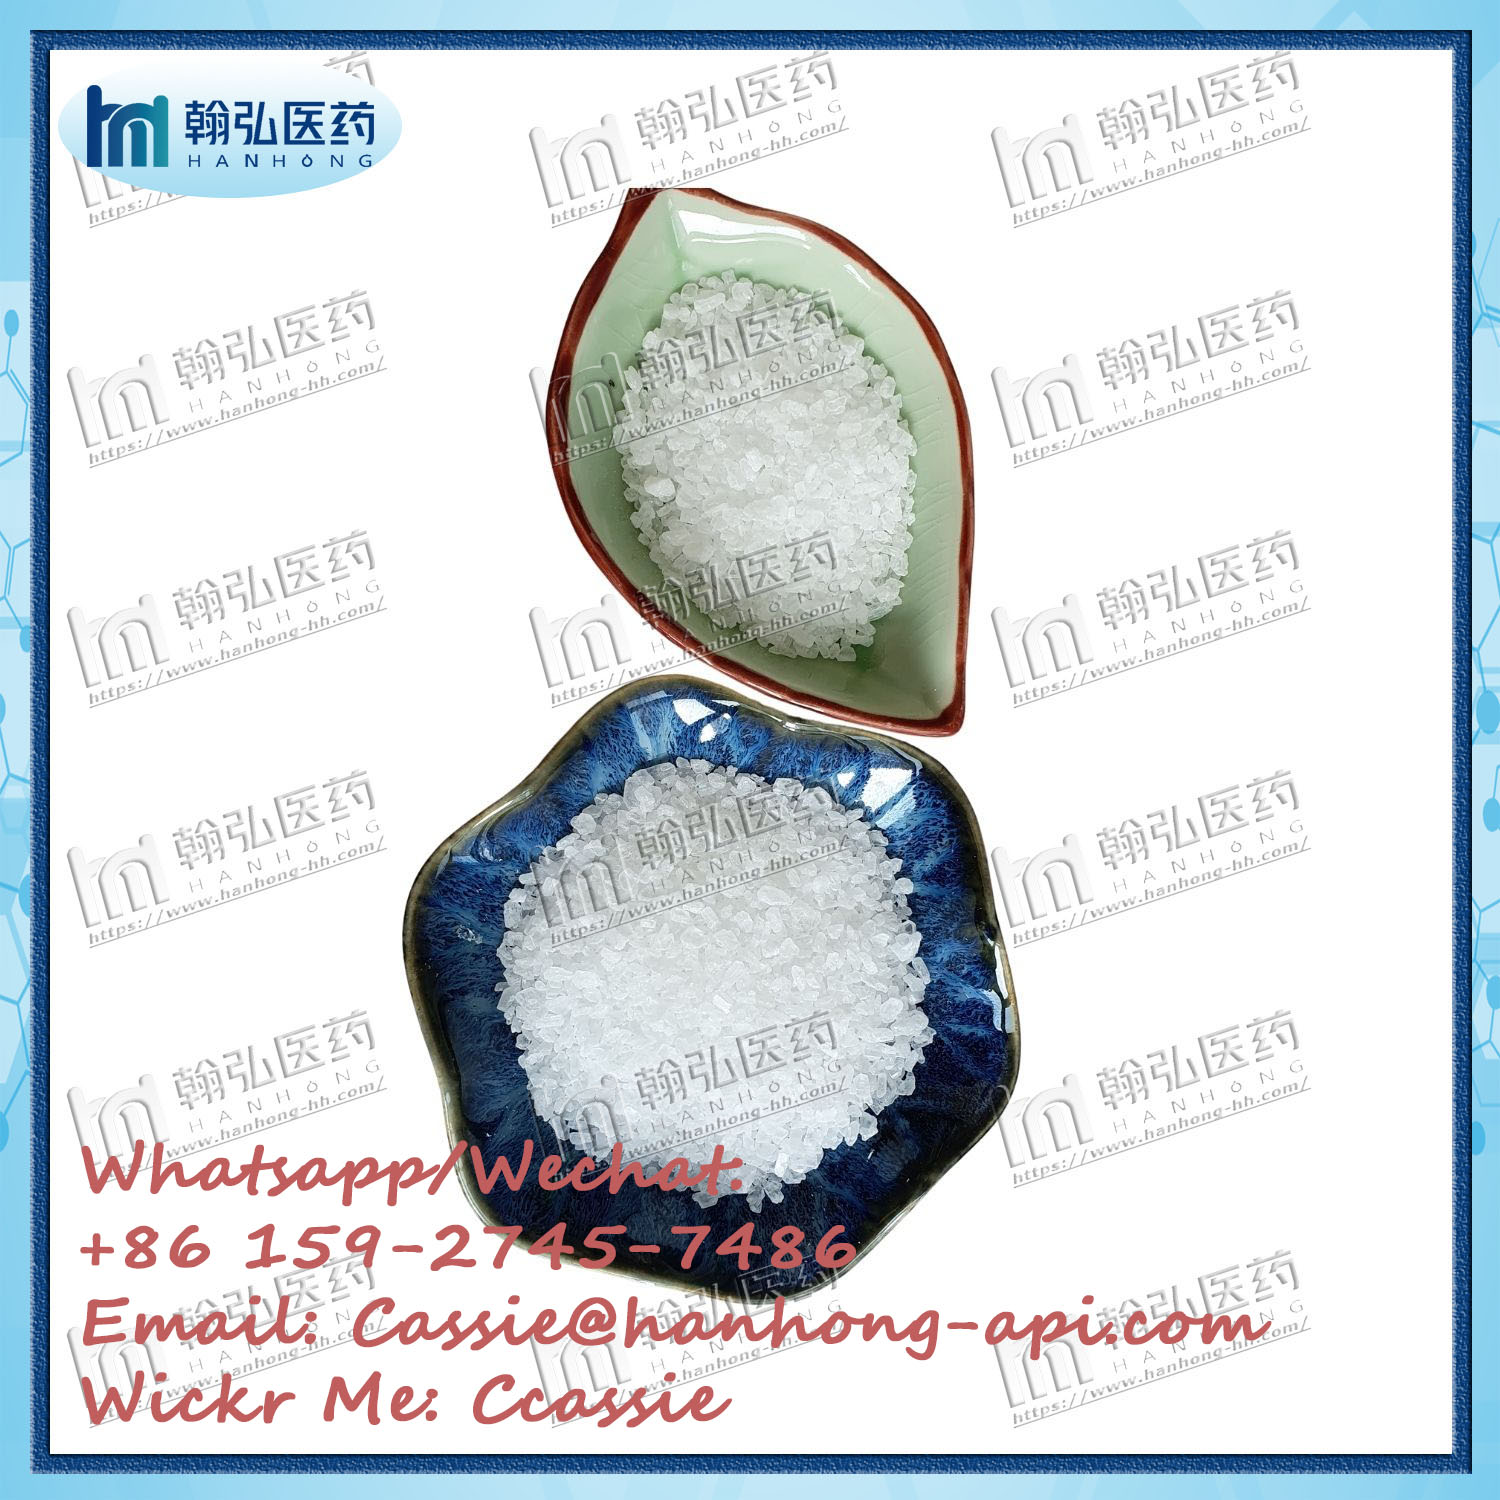 Factory Supply New Stock 2-(2-Chlorophenyl)-2-nitrocyclohexanone CAS 2079878-75-2 with High Quality High Purity Whatsapp/Wechat: +8615927457486 WickrMe: Ccassie